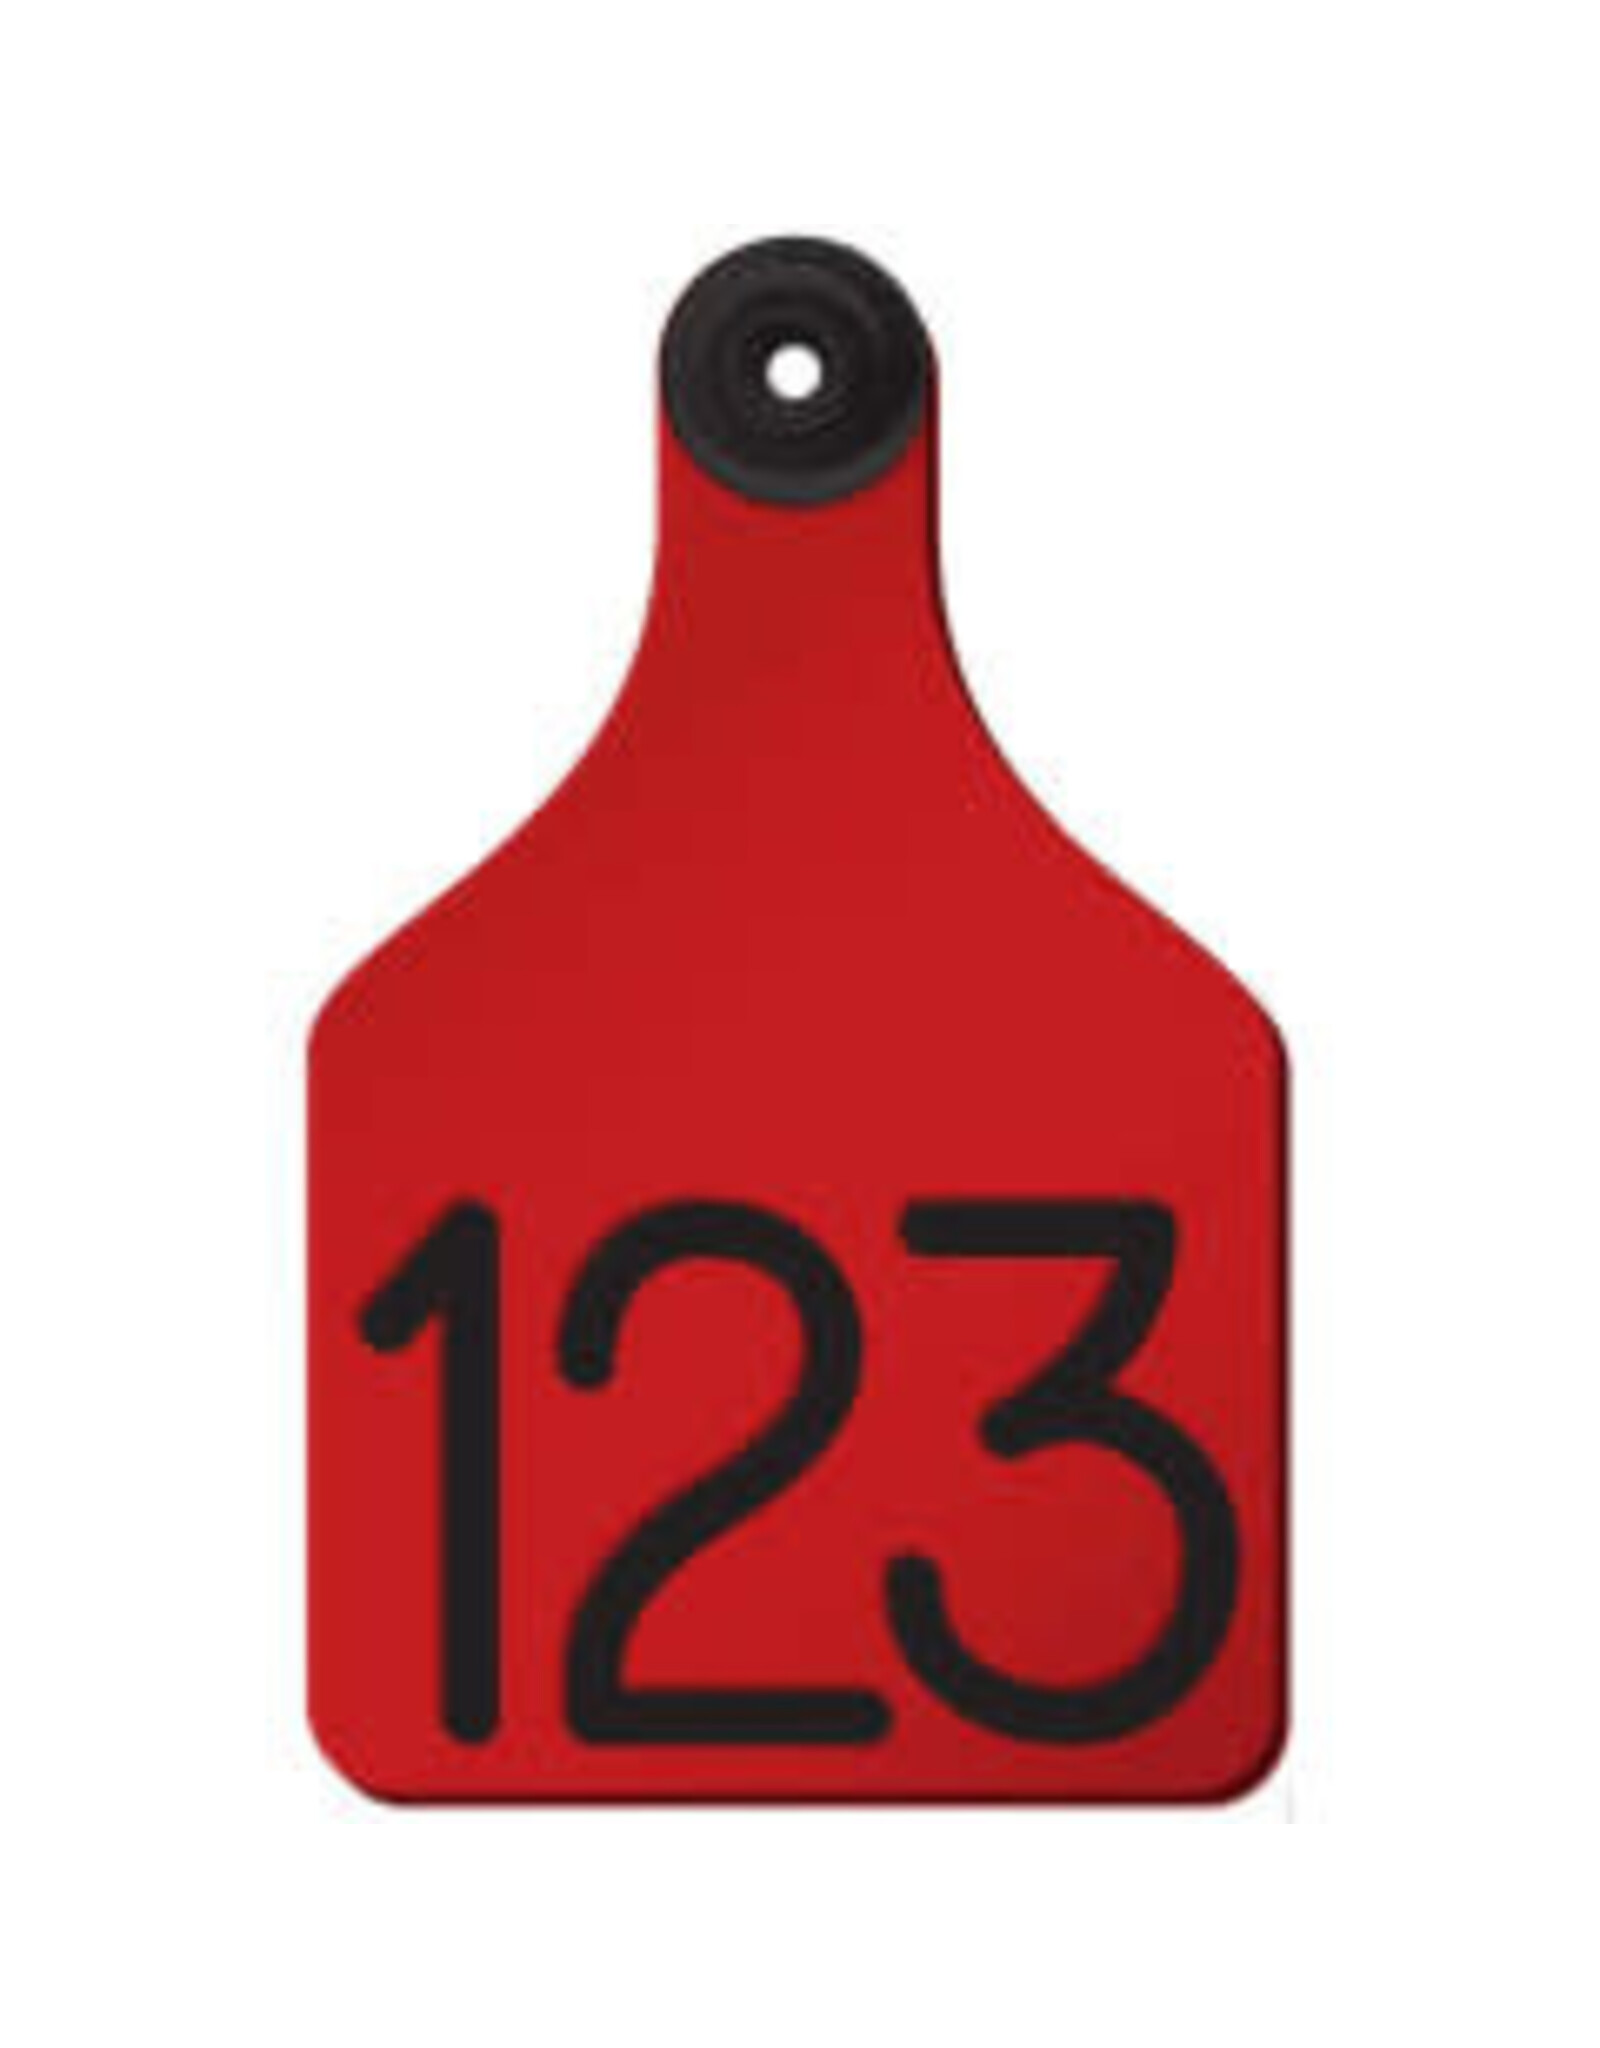 Ritchey TAG* Ritchey - Universal Large- Red/Black  25 pk - No Buttons